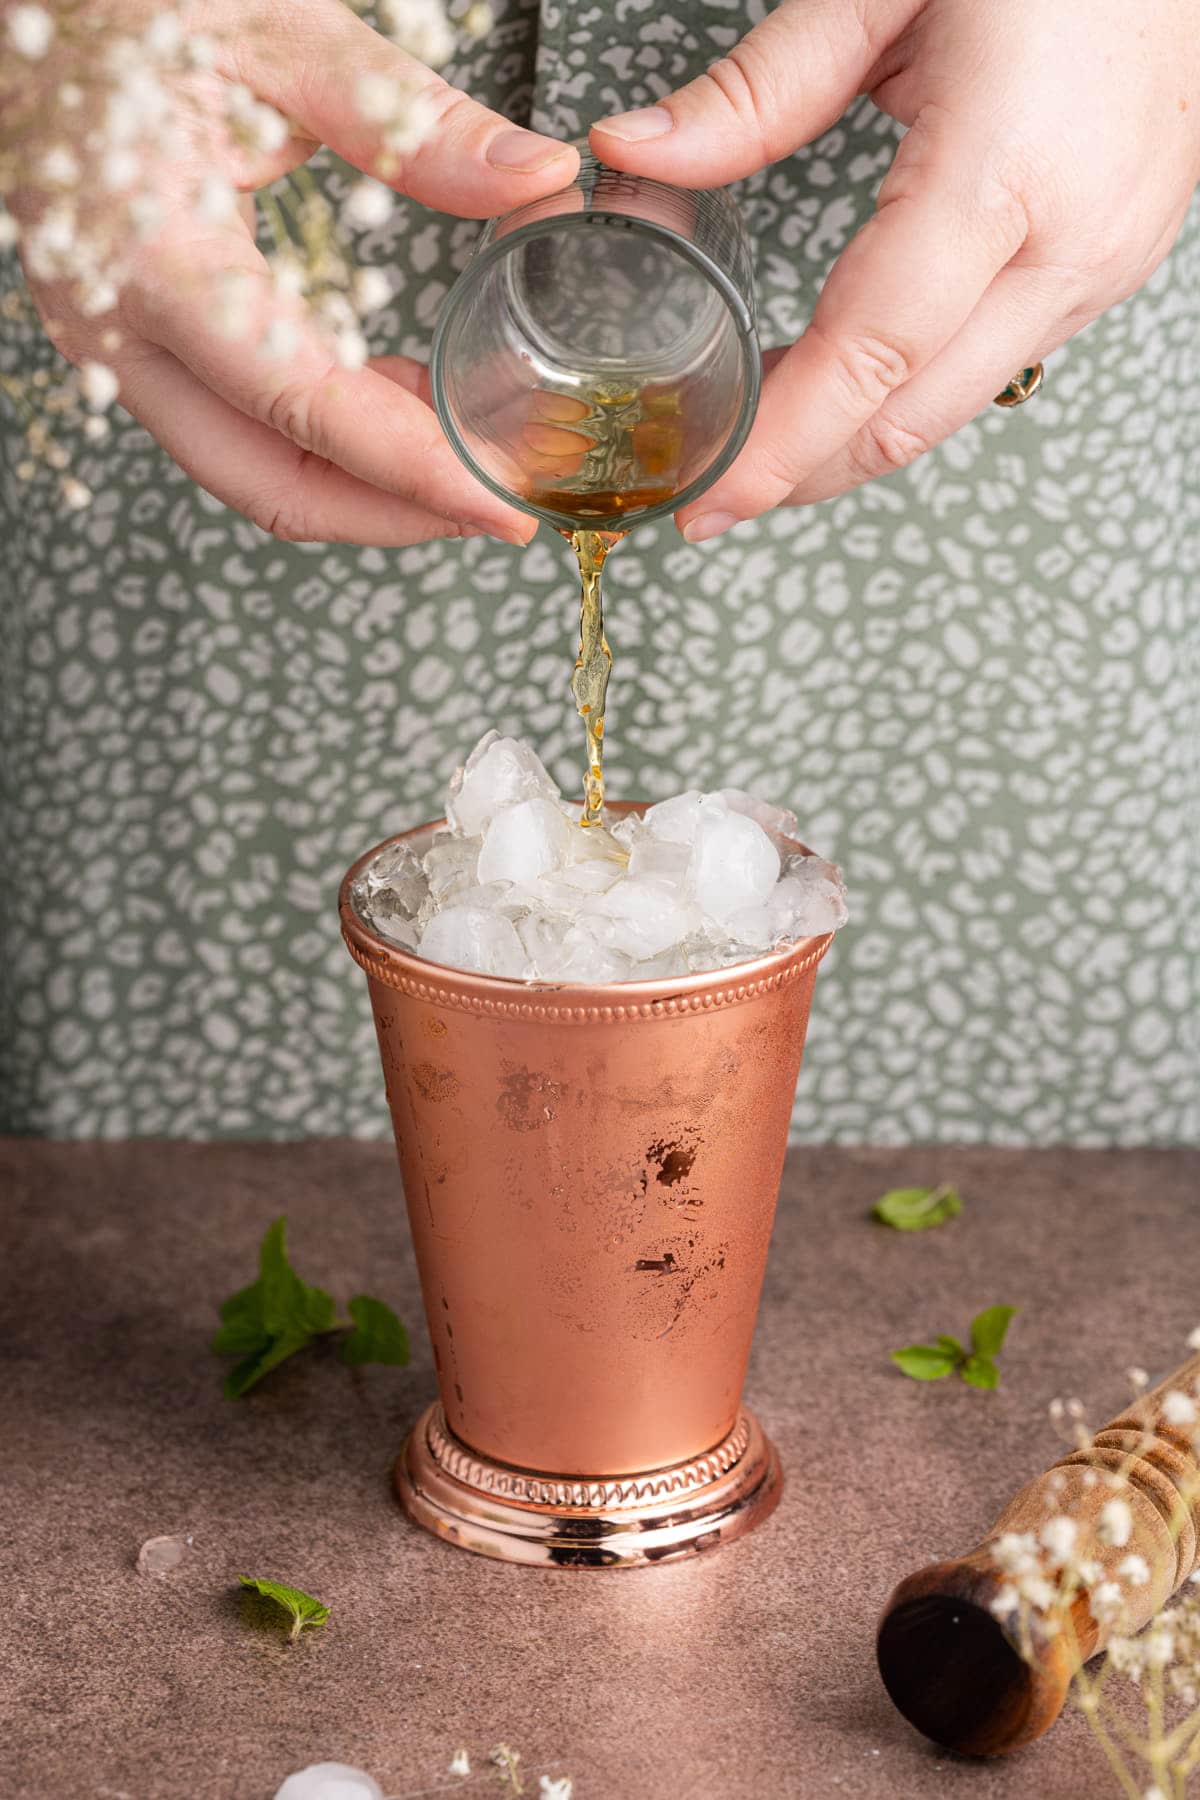 Adding Makers Mark Whisky to Mint Julep